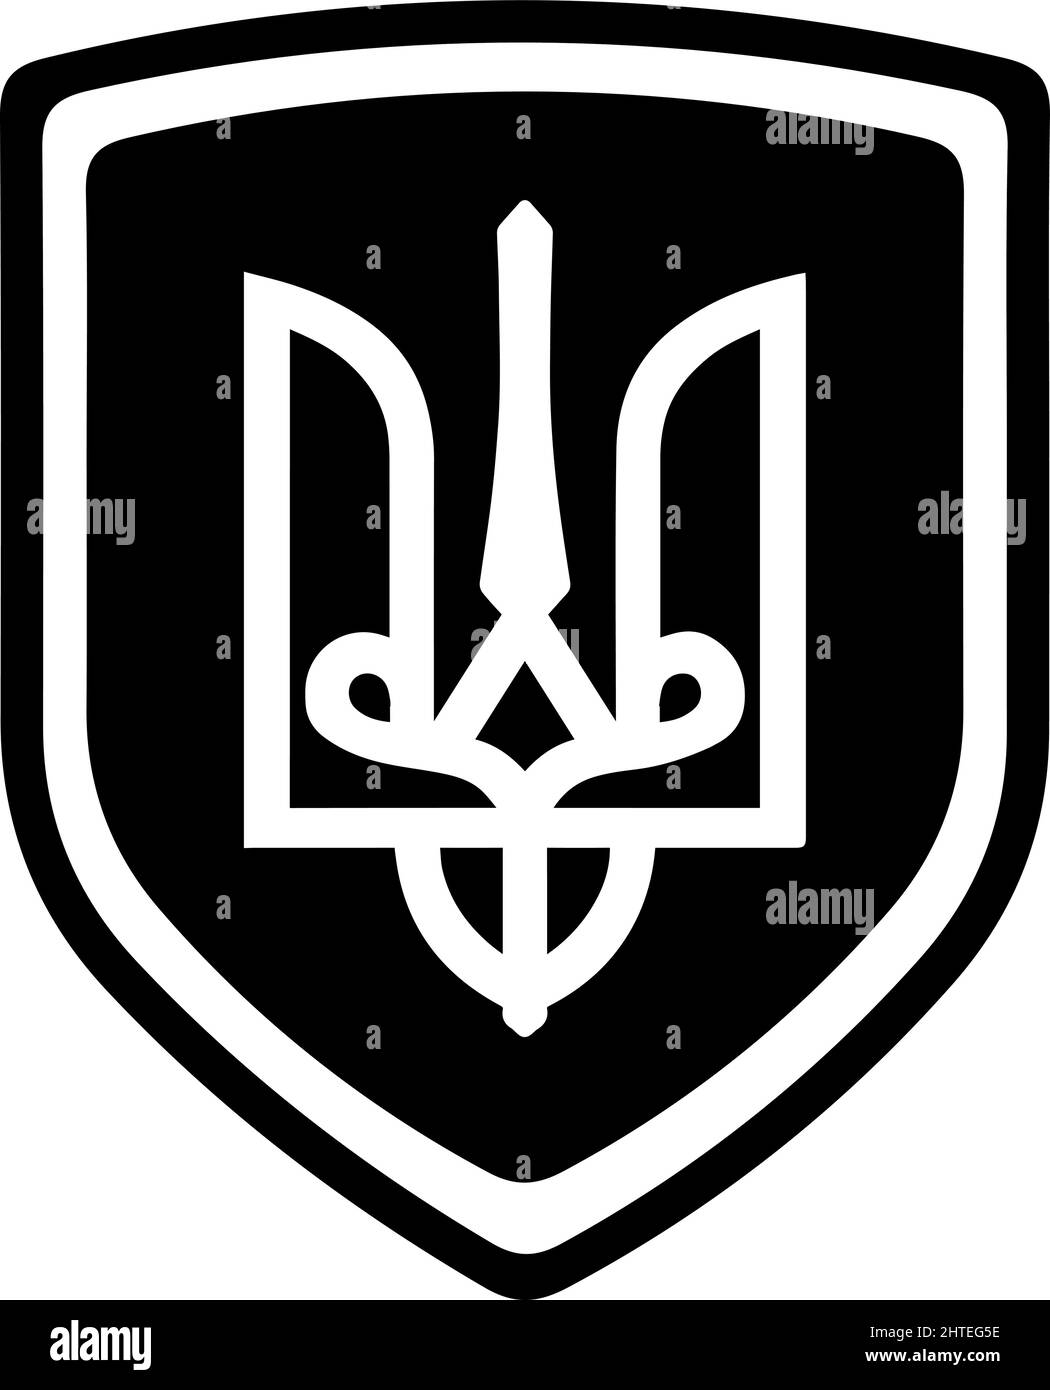 Coat of arms of Ukraine black and white. icon on shield. Save Ukraine concept.-SupplementalCategories+=Images Stock Vector